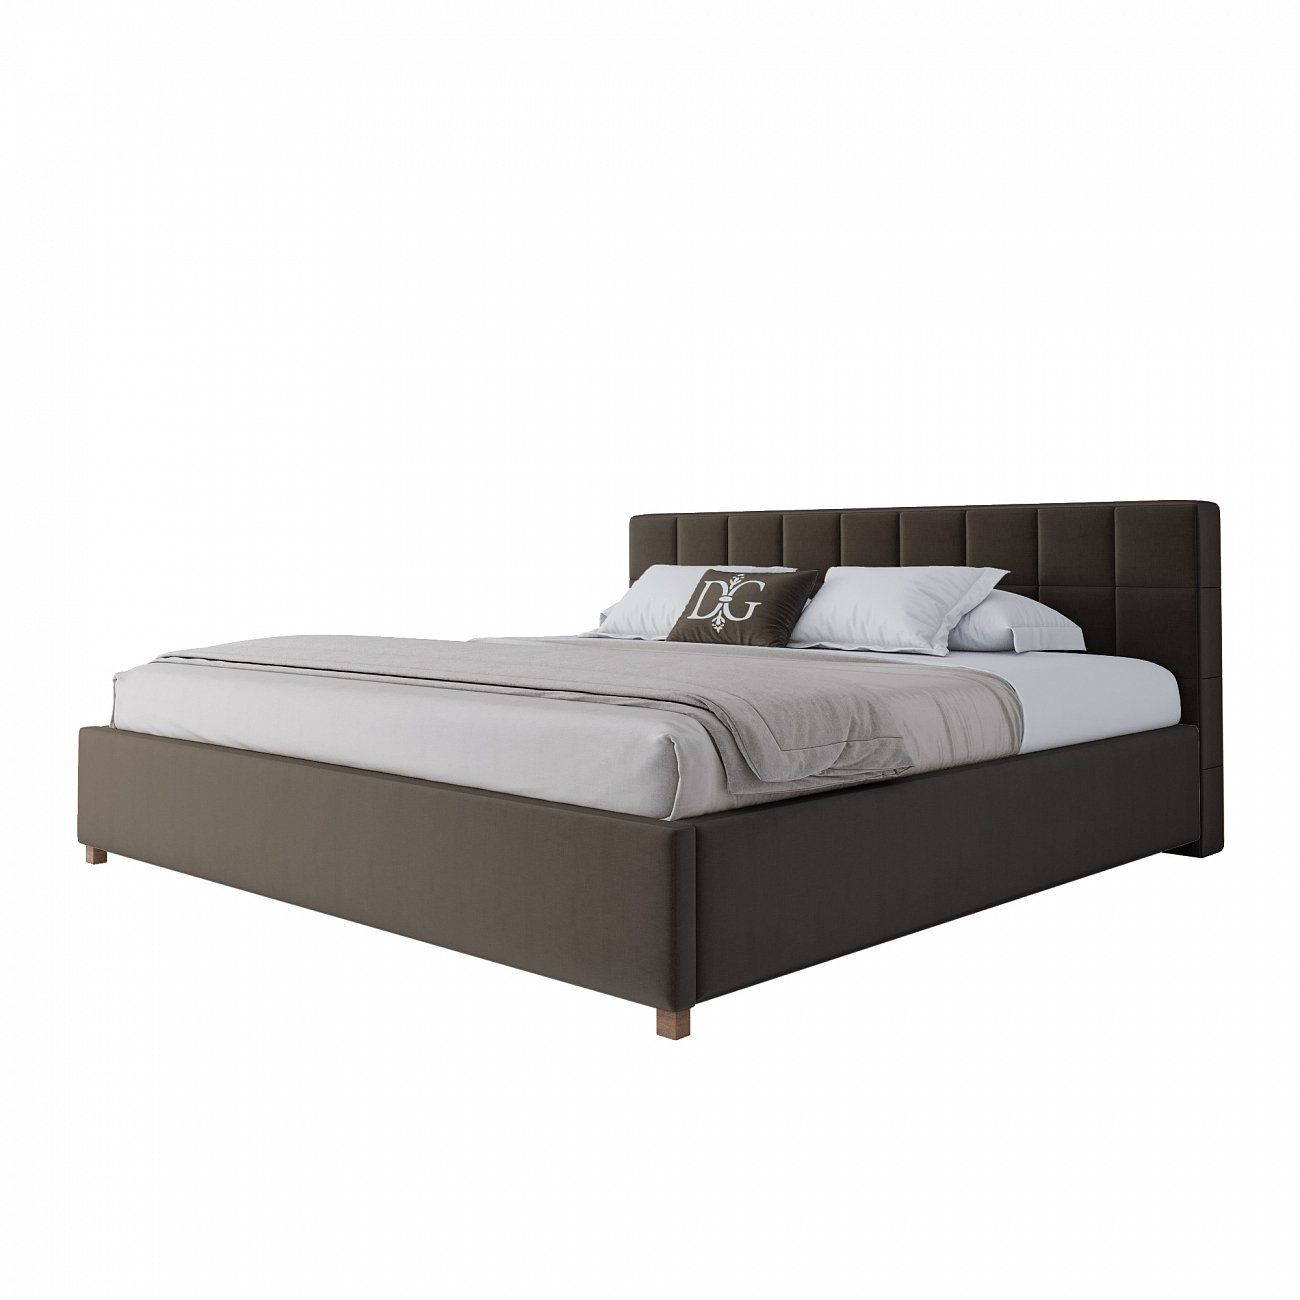 The bed is large 200x200 Wales brown